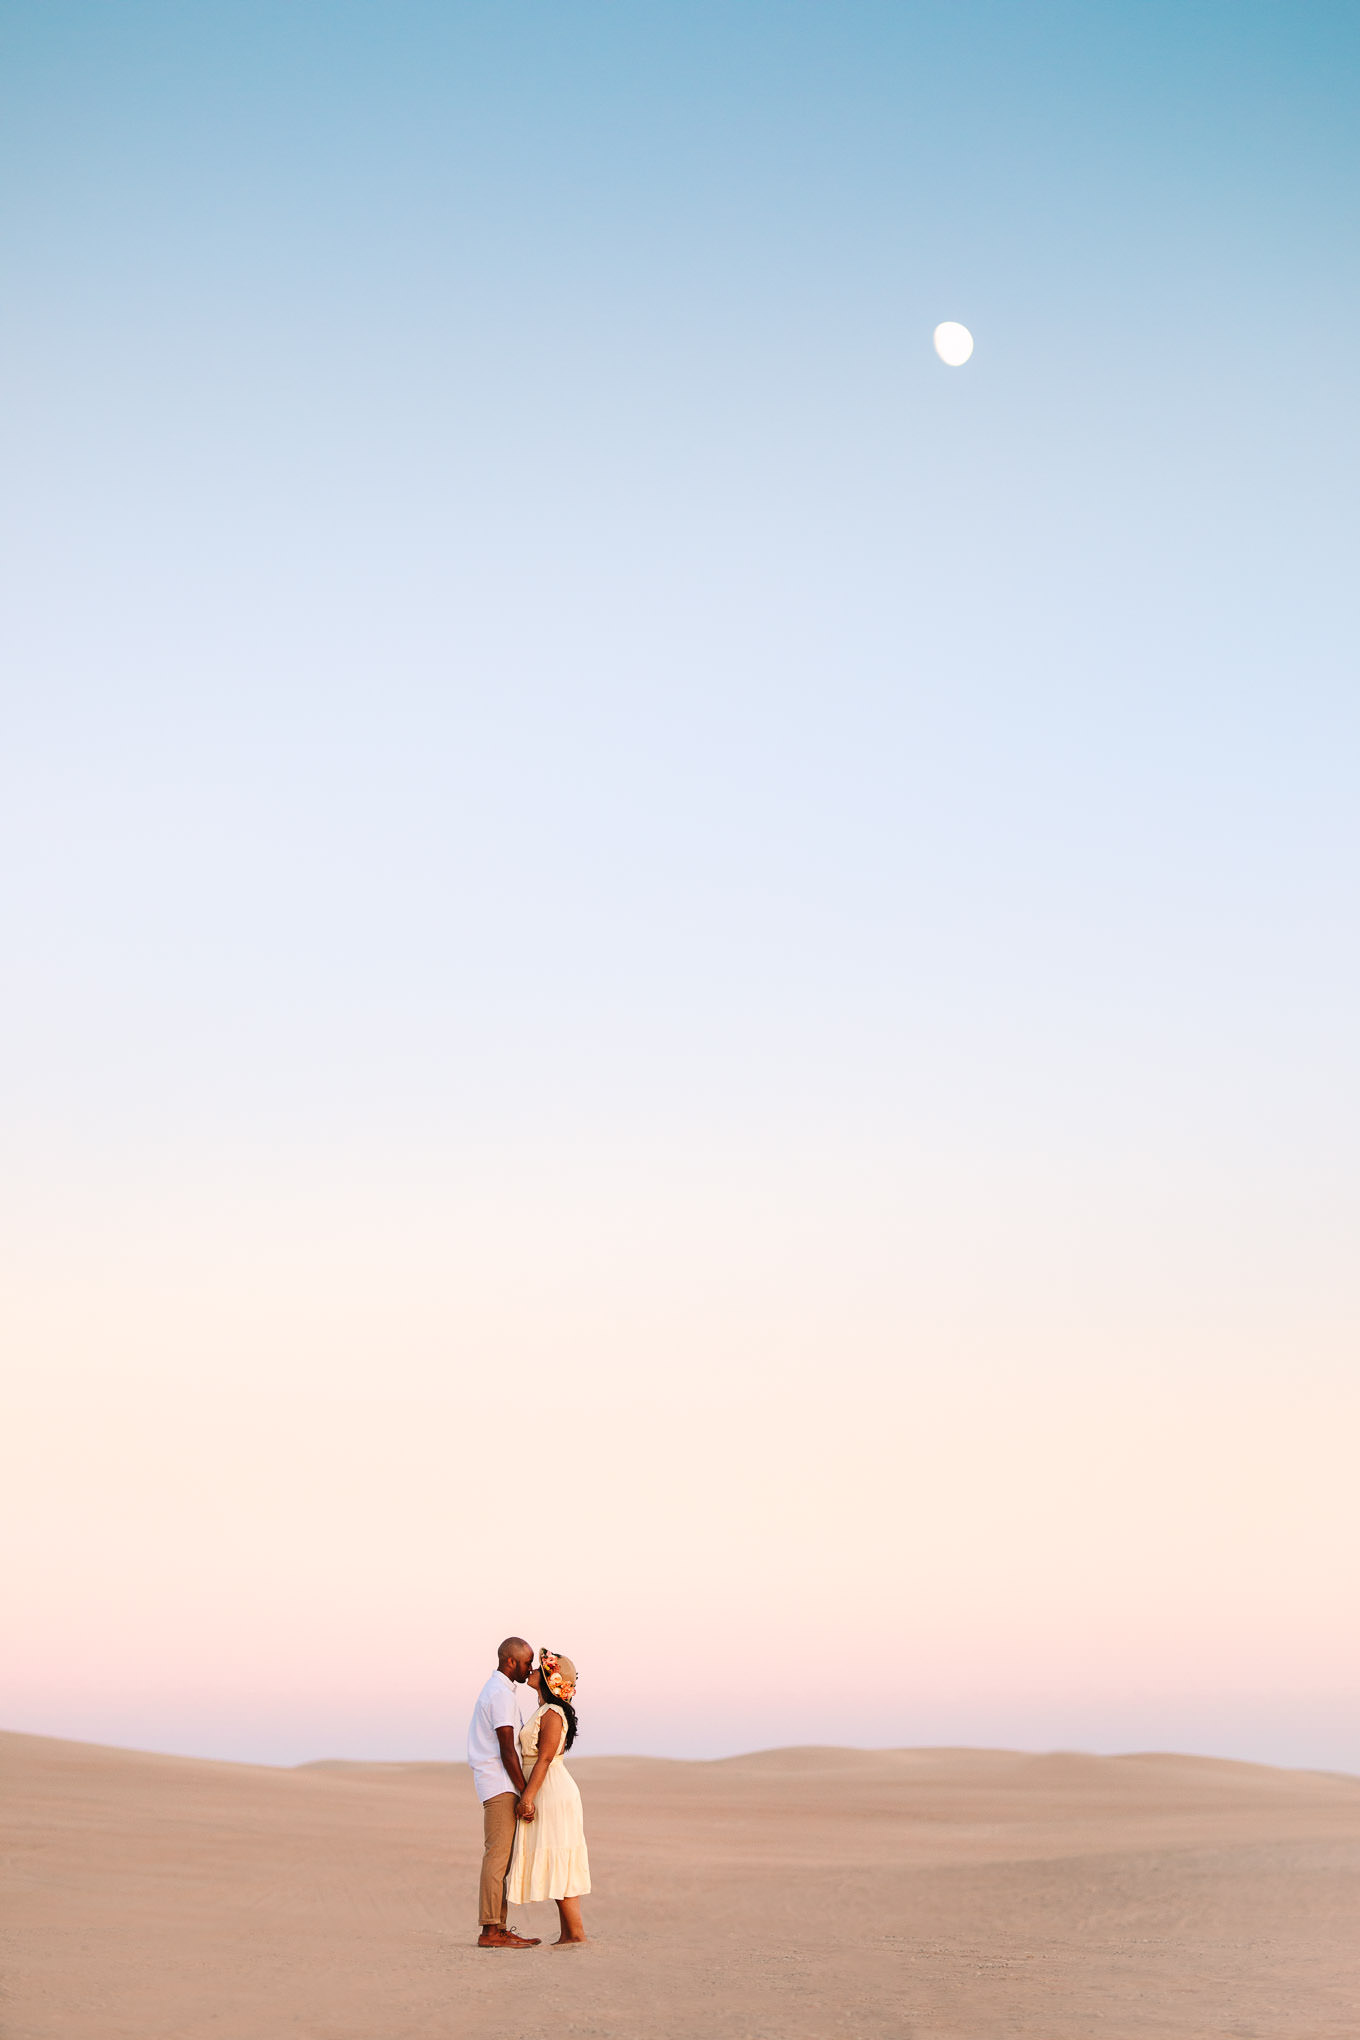 Moon view during engagement session | California Sand Dunes engagement session | Colorful Palm Springs wedding photography | #palmspringsphotographer #sanddunes #engagementsession #southerncalifornia  Source: Mary Costa Photography | Los Angeles